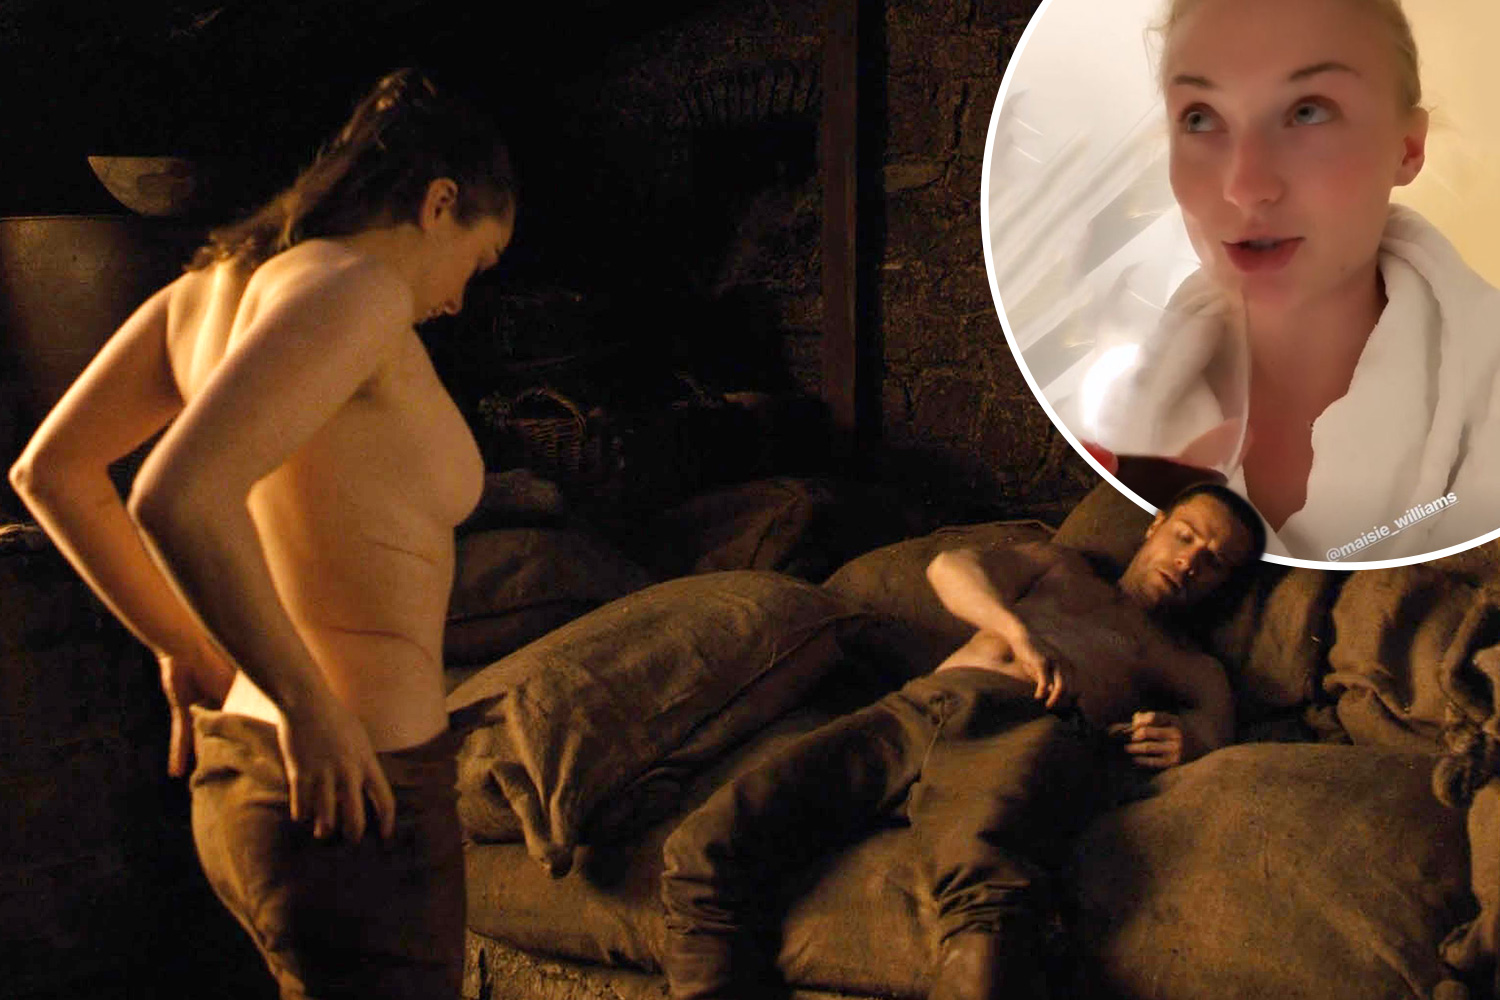 daniel maxwell recommends sophieturner nude pic